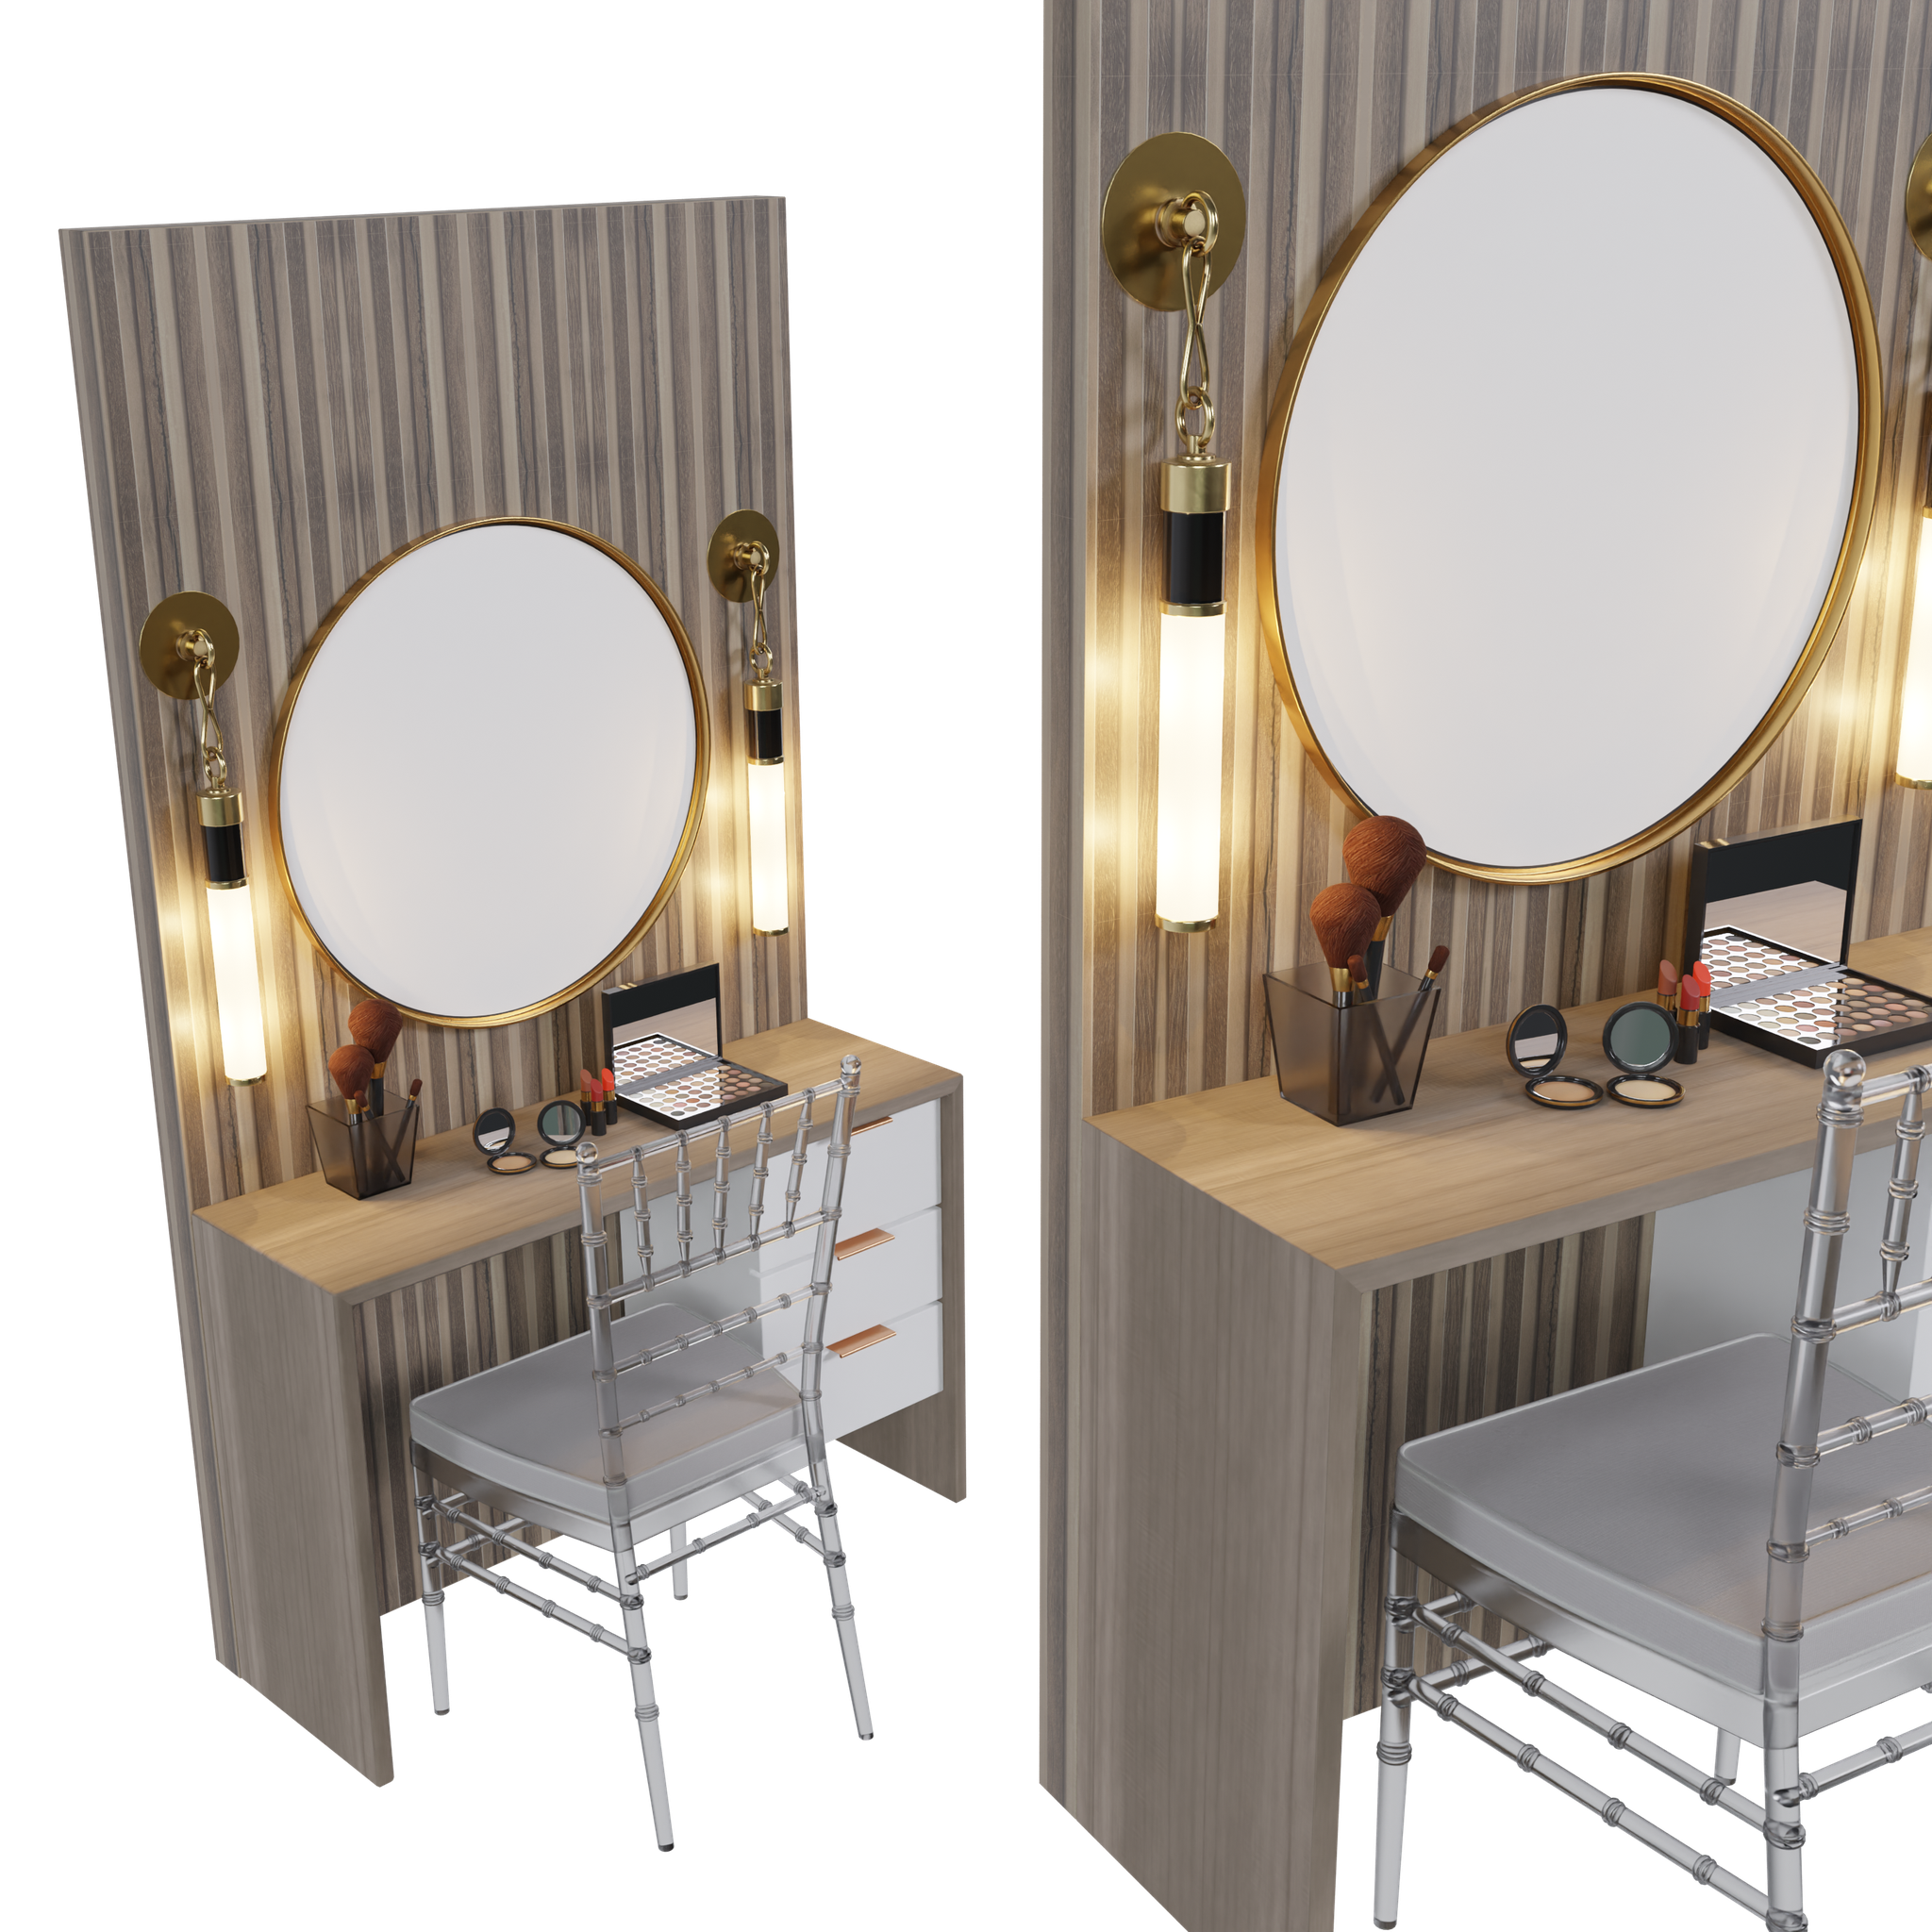 Attractive Mirror Dressing TABLE DESIGNS FOR BEGINNERS | Modern dressing  table designs, Dressing table design, Dressing room design